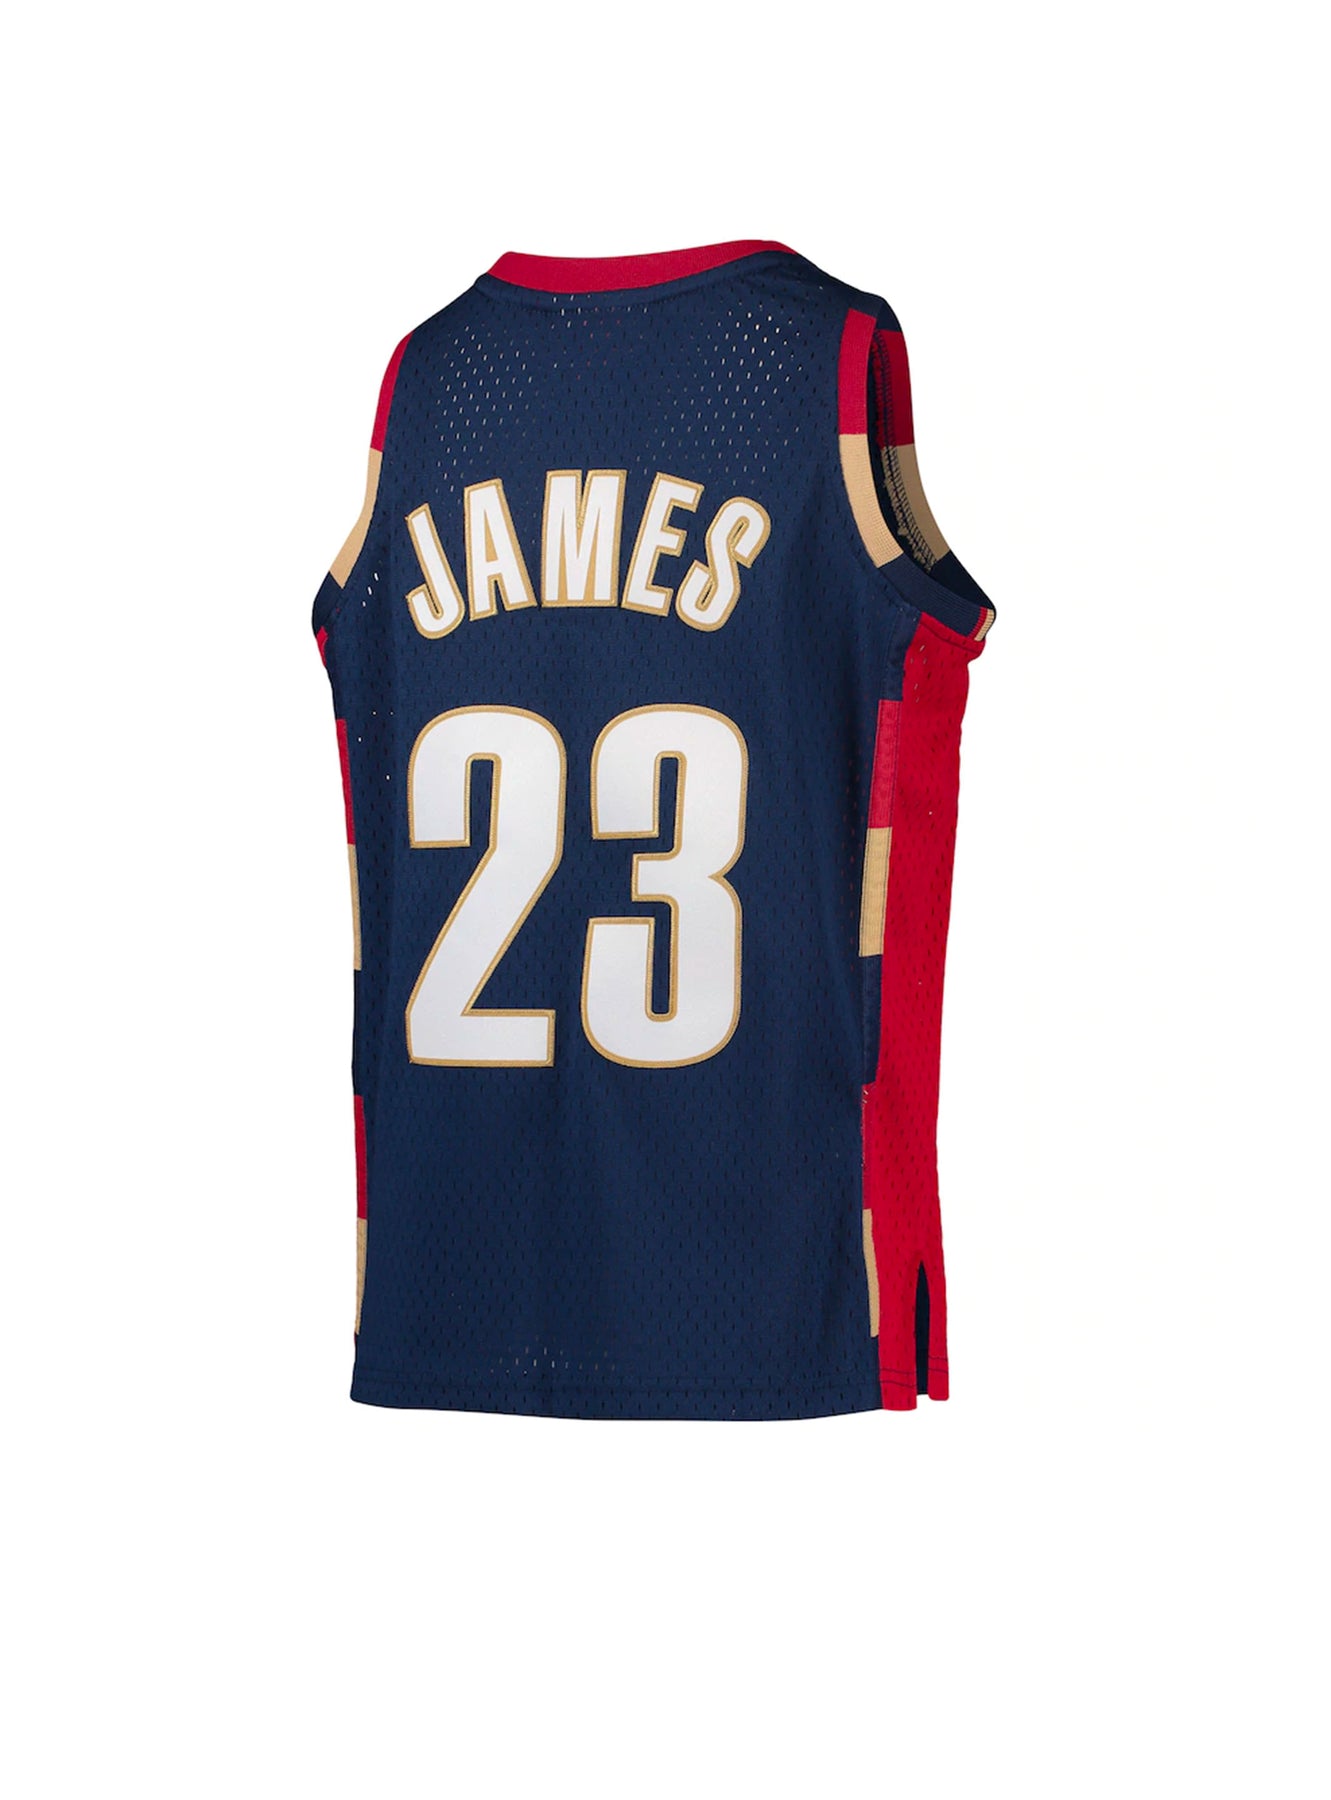 Authentic Lebron James Cleveland Cavaliers 2008-09 Jersey - Shop Mitchell &  Ness Authentic Jerseys and Replicas Mitchell & Ness Nostalgia Co.